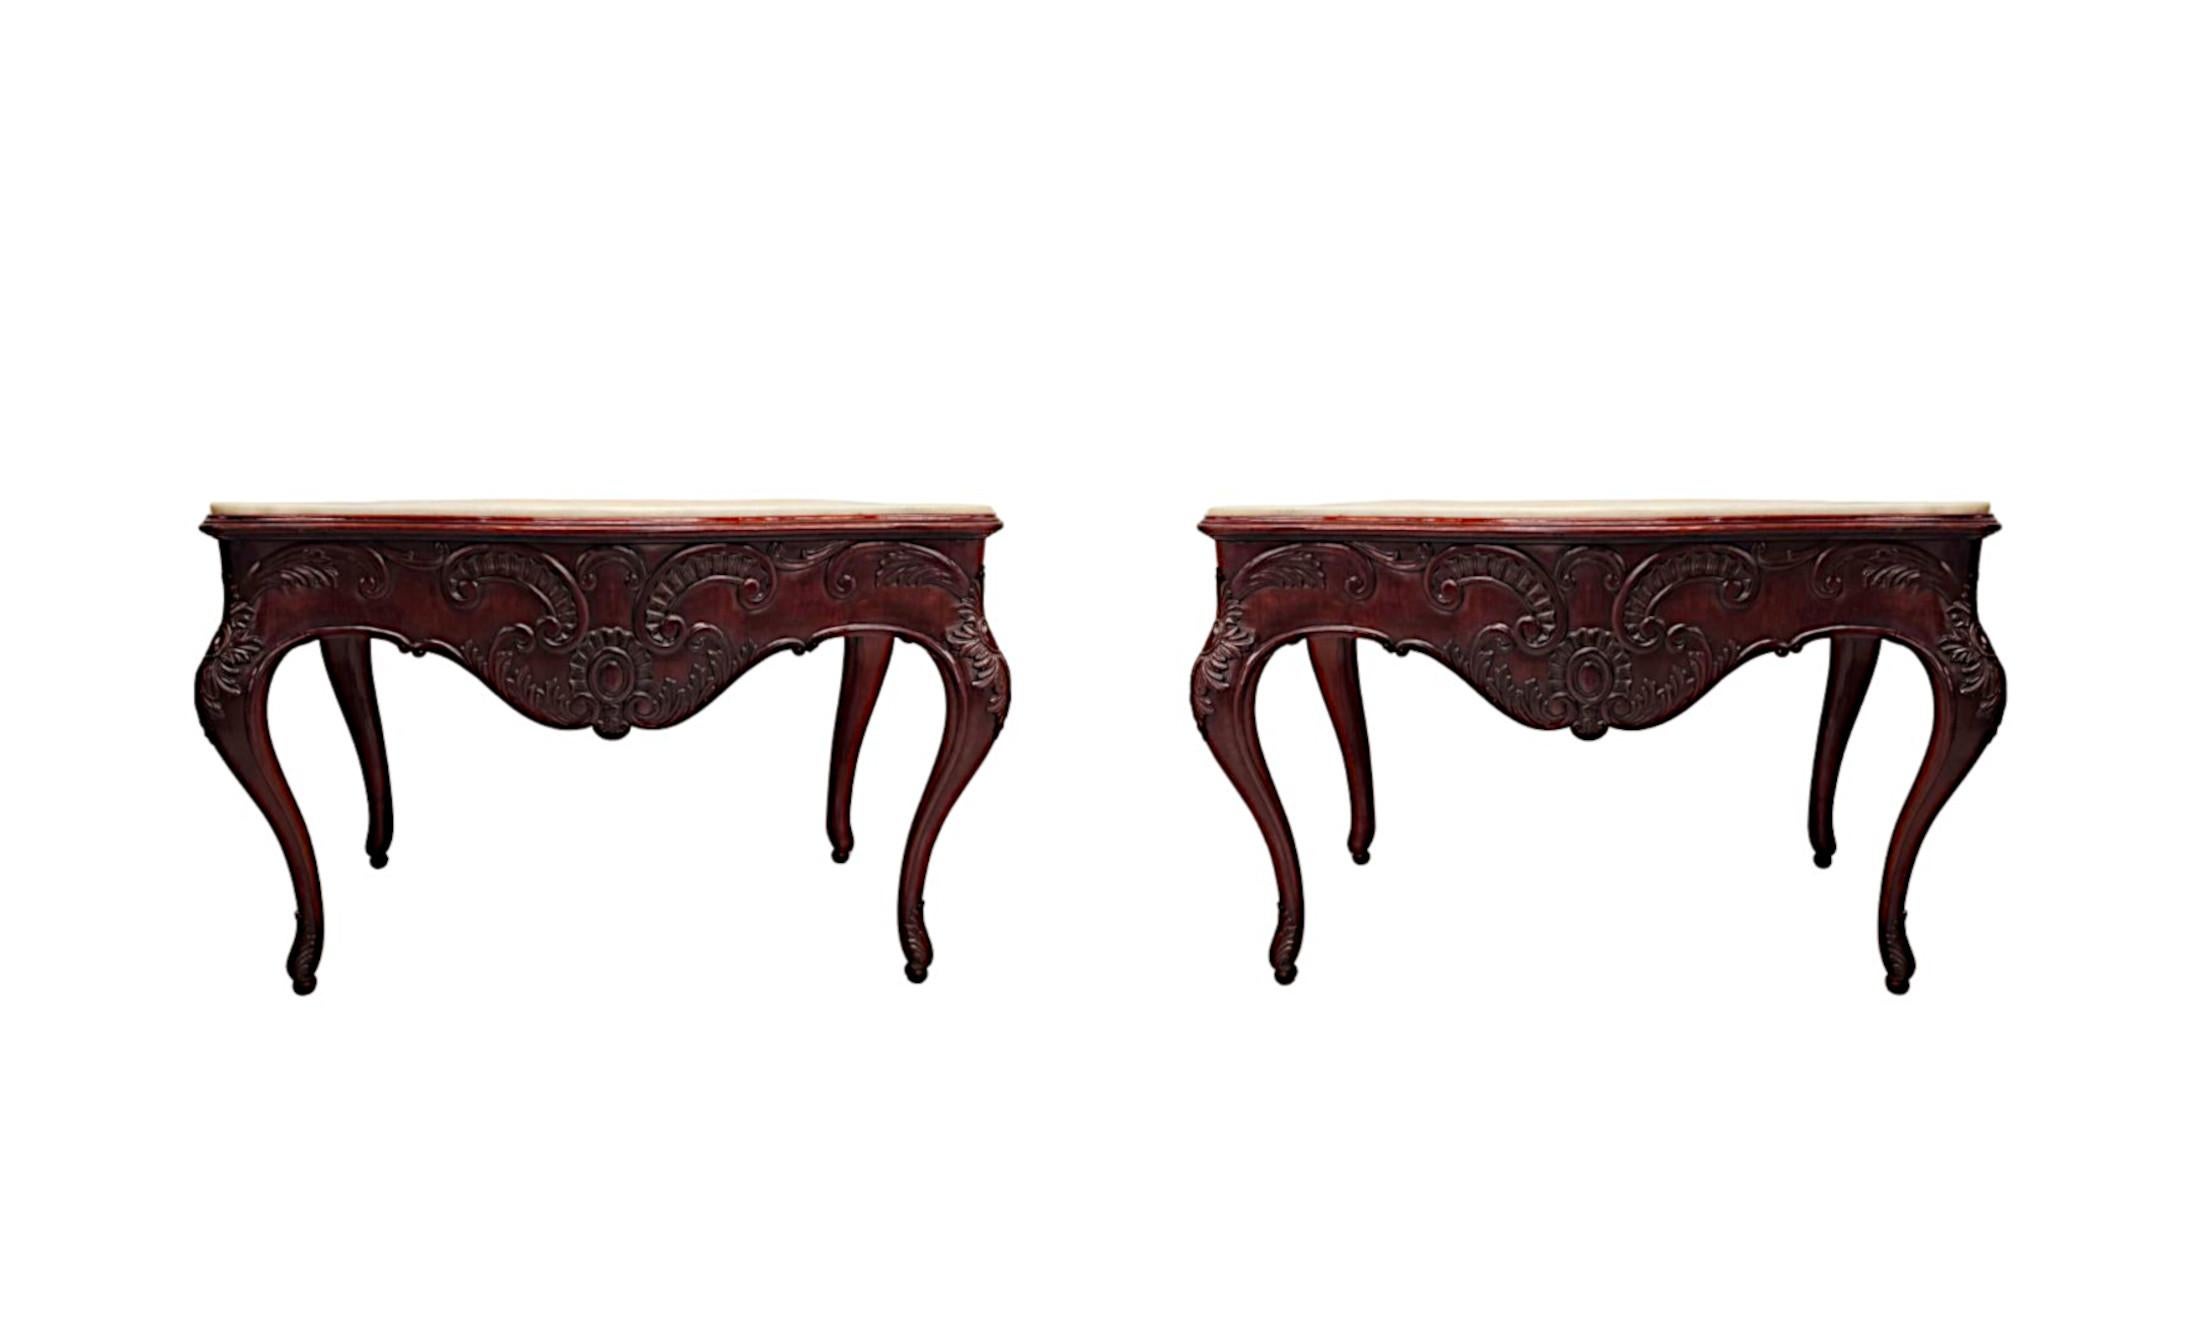 A very rare pair of 19th Century well figured, mahogany marble top console tables, finely hand carved and of exceptional quality with gorgeously rich patination and fine grain. The stunning moulded, serpentine Carrara White marble top of rectangular